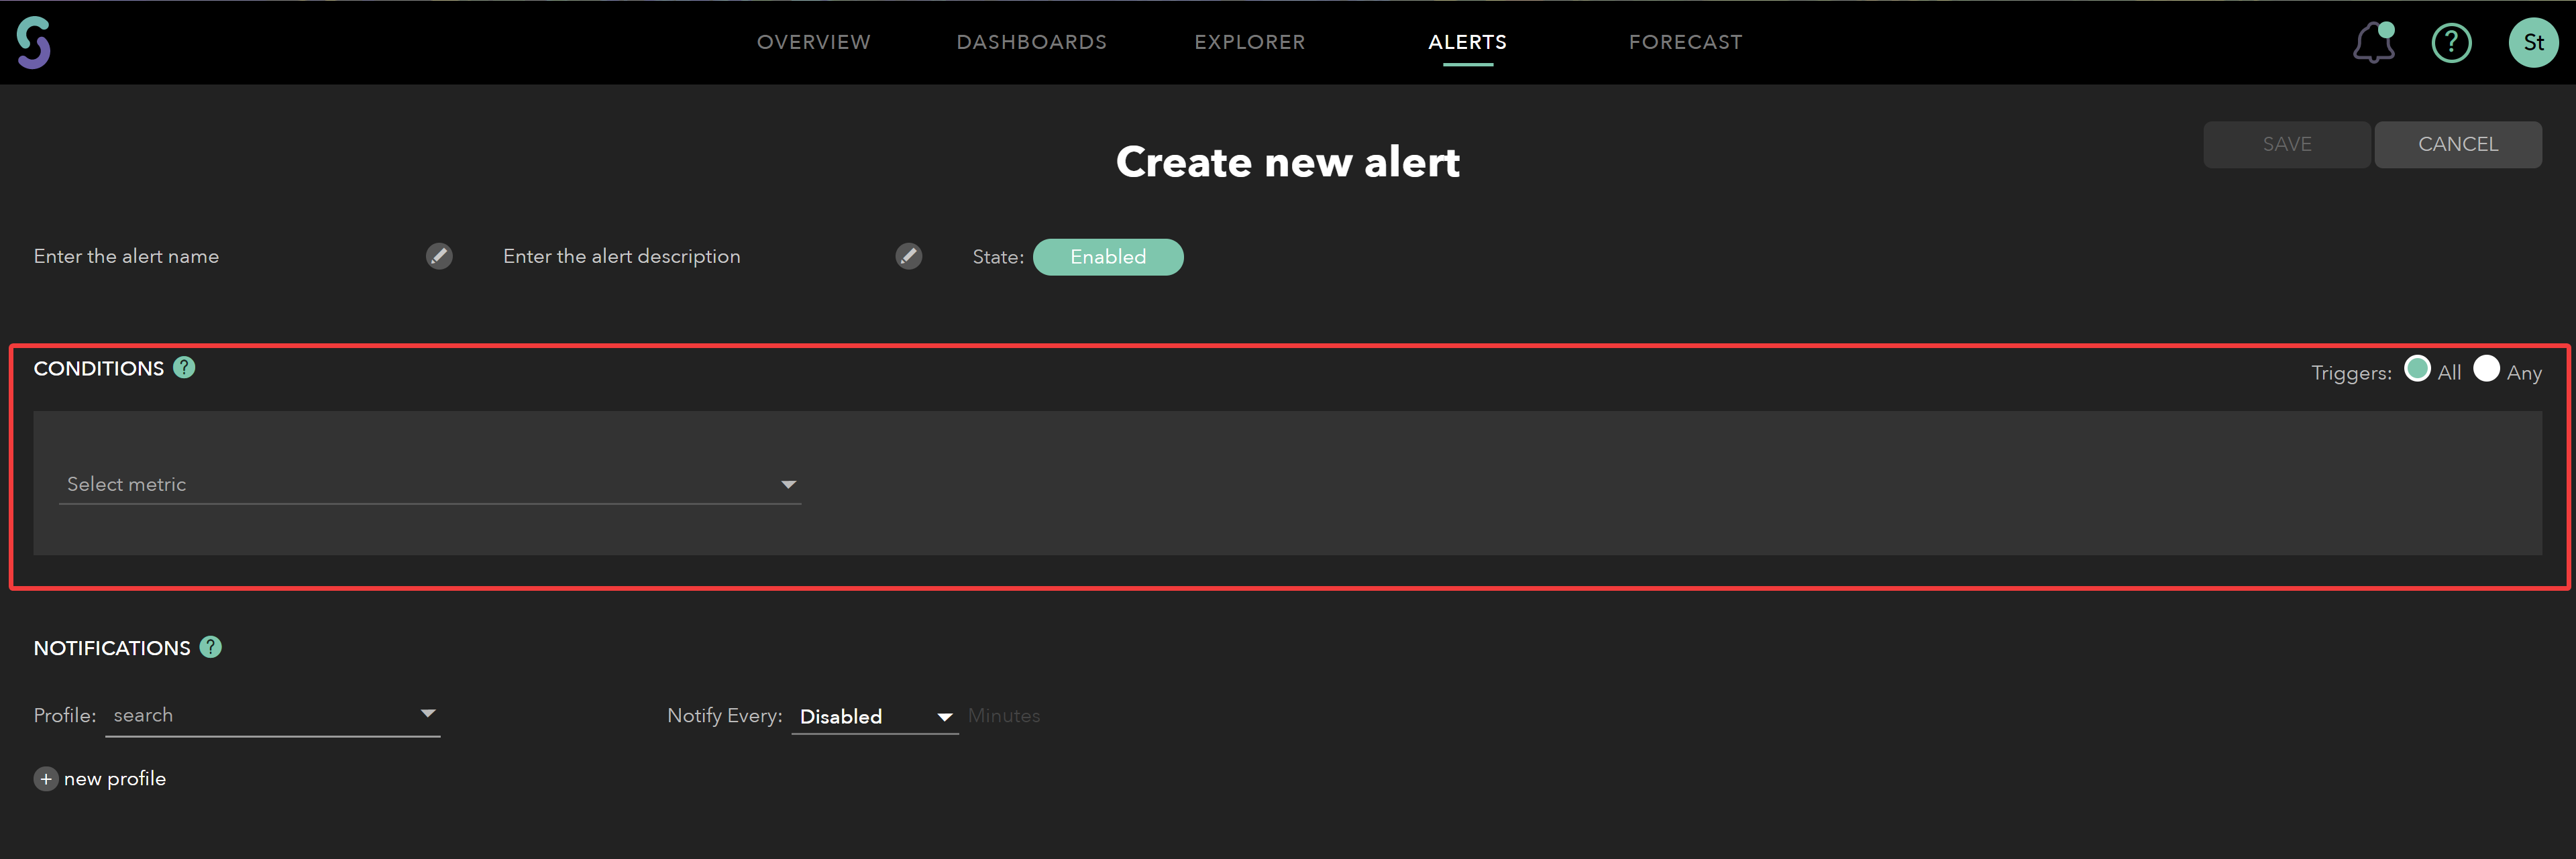 Overview of Create new alert